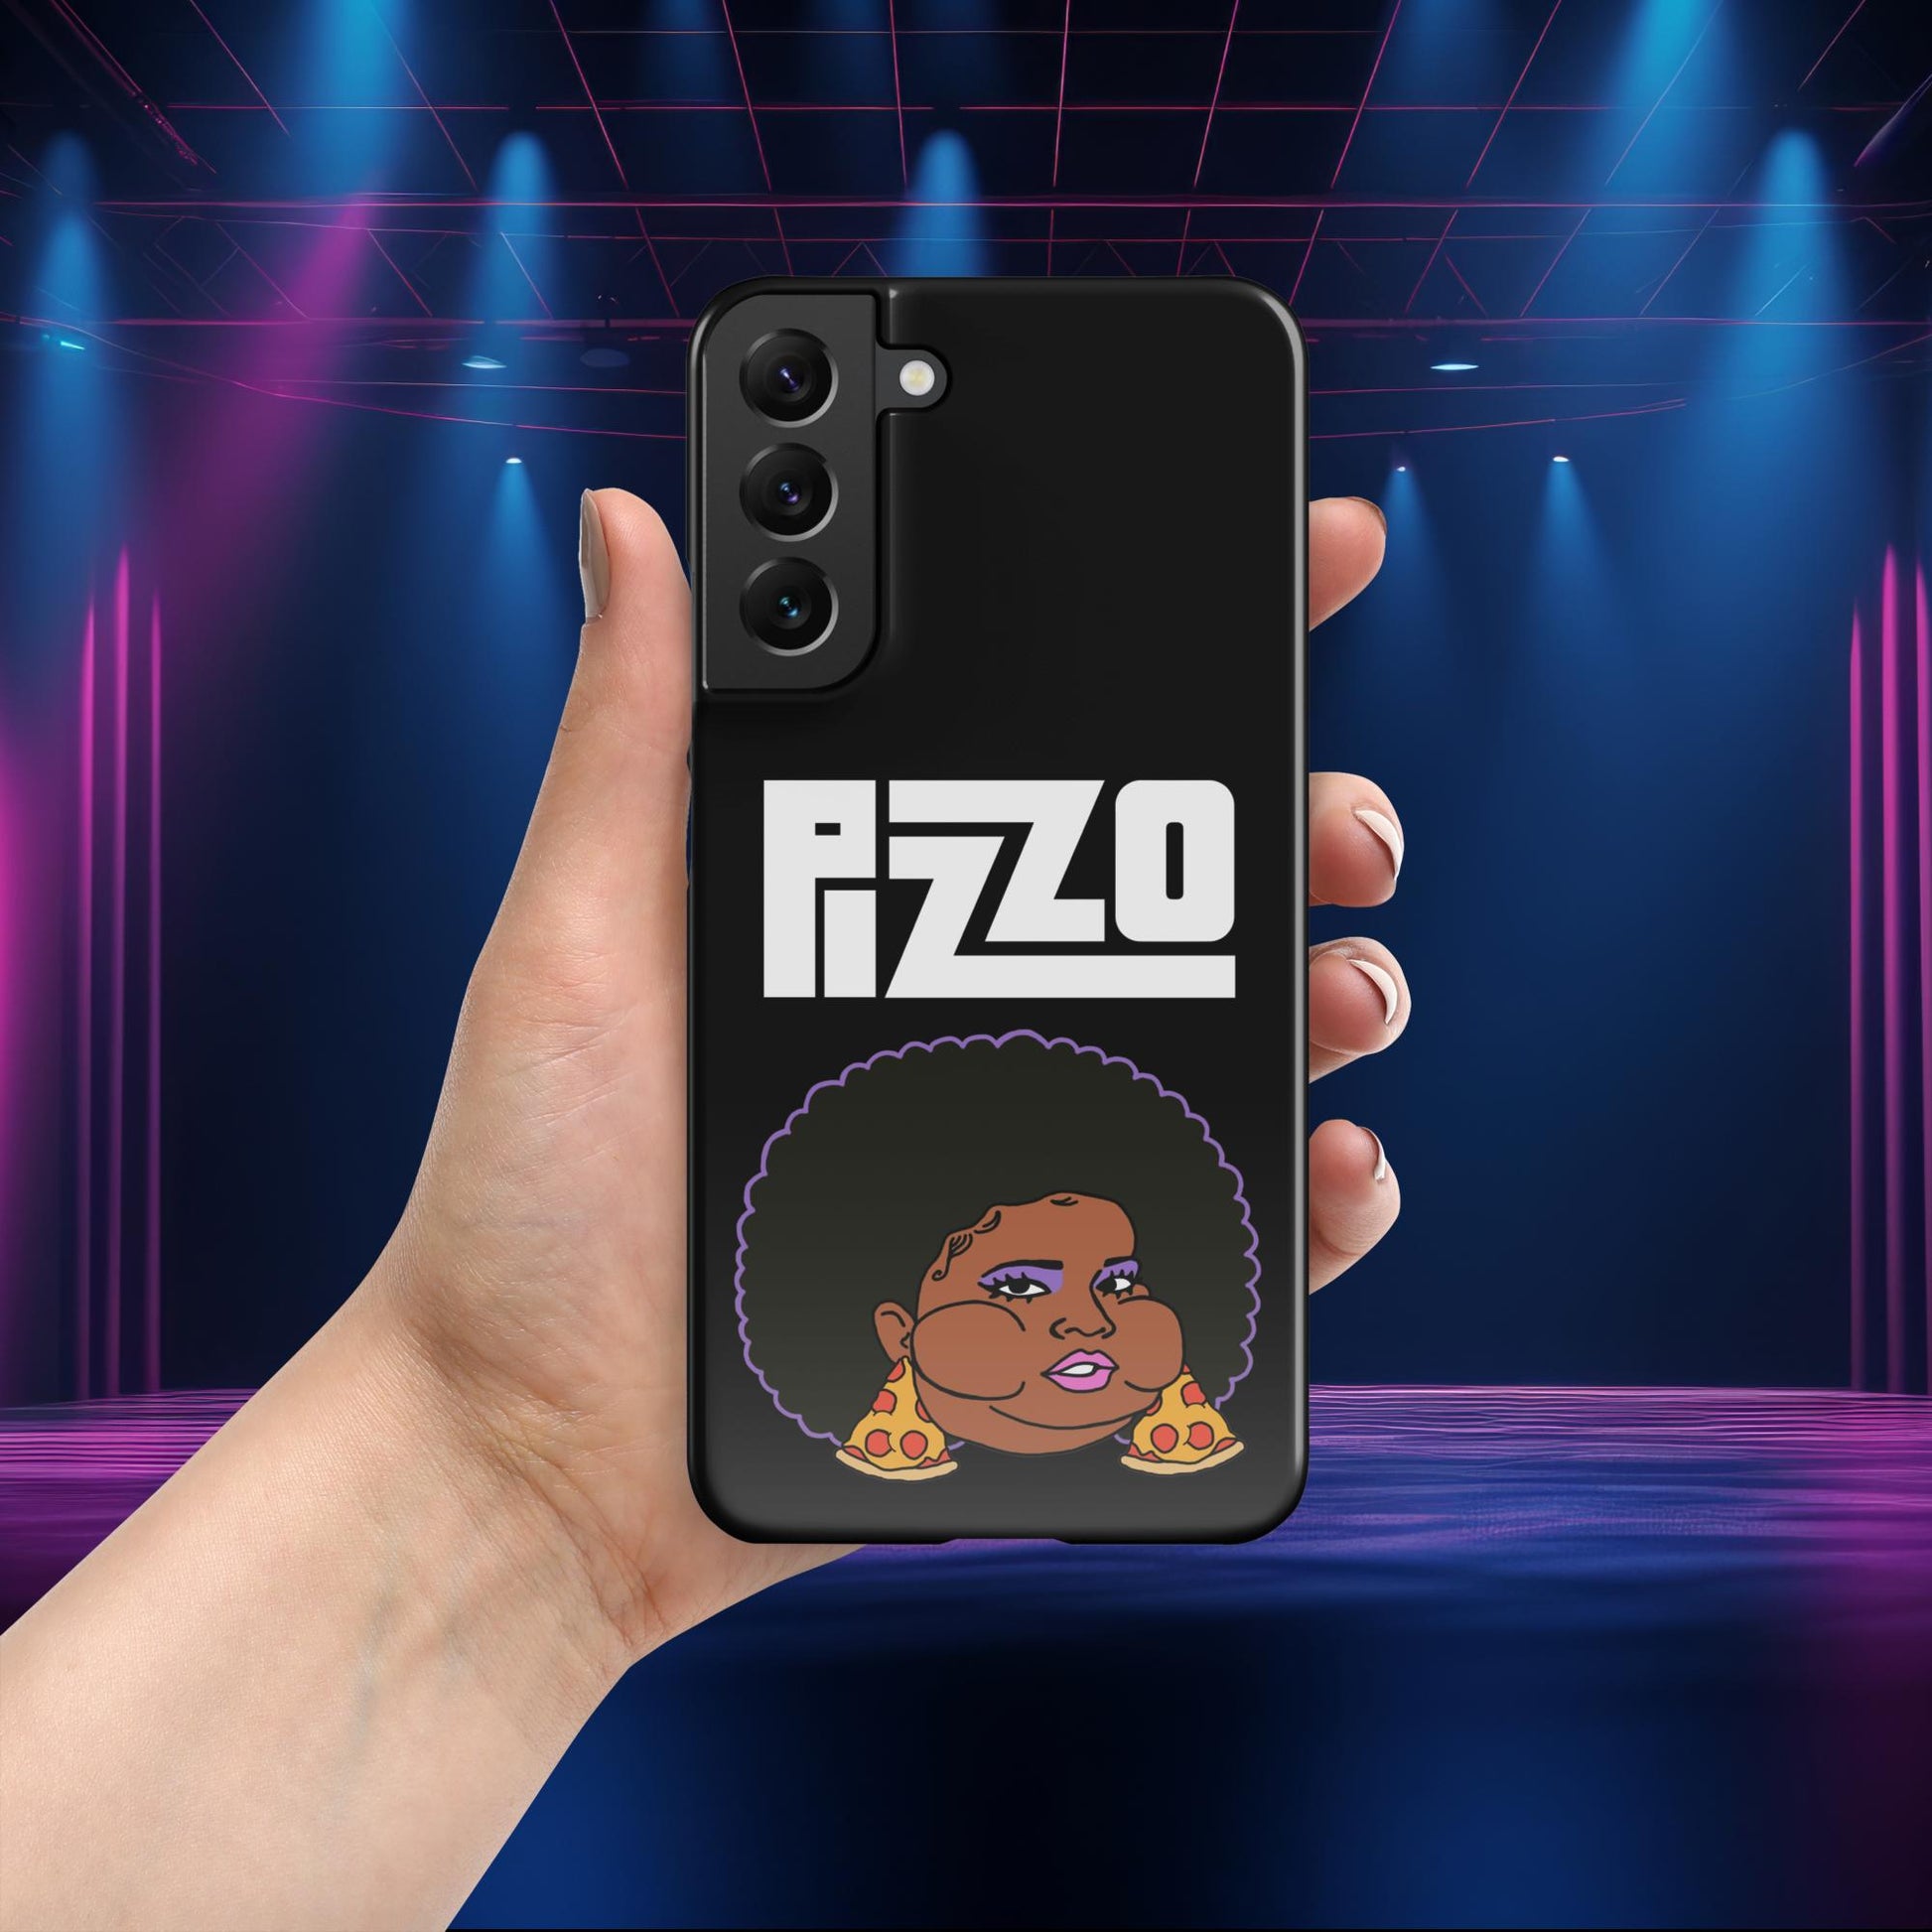 Pizzo Lizzo Pizza Lizzo Merch Lizzo Gift Song Lyrics Lizzo Snap case for Samsung Next Cult Brand